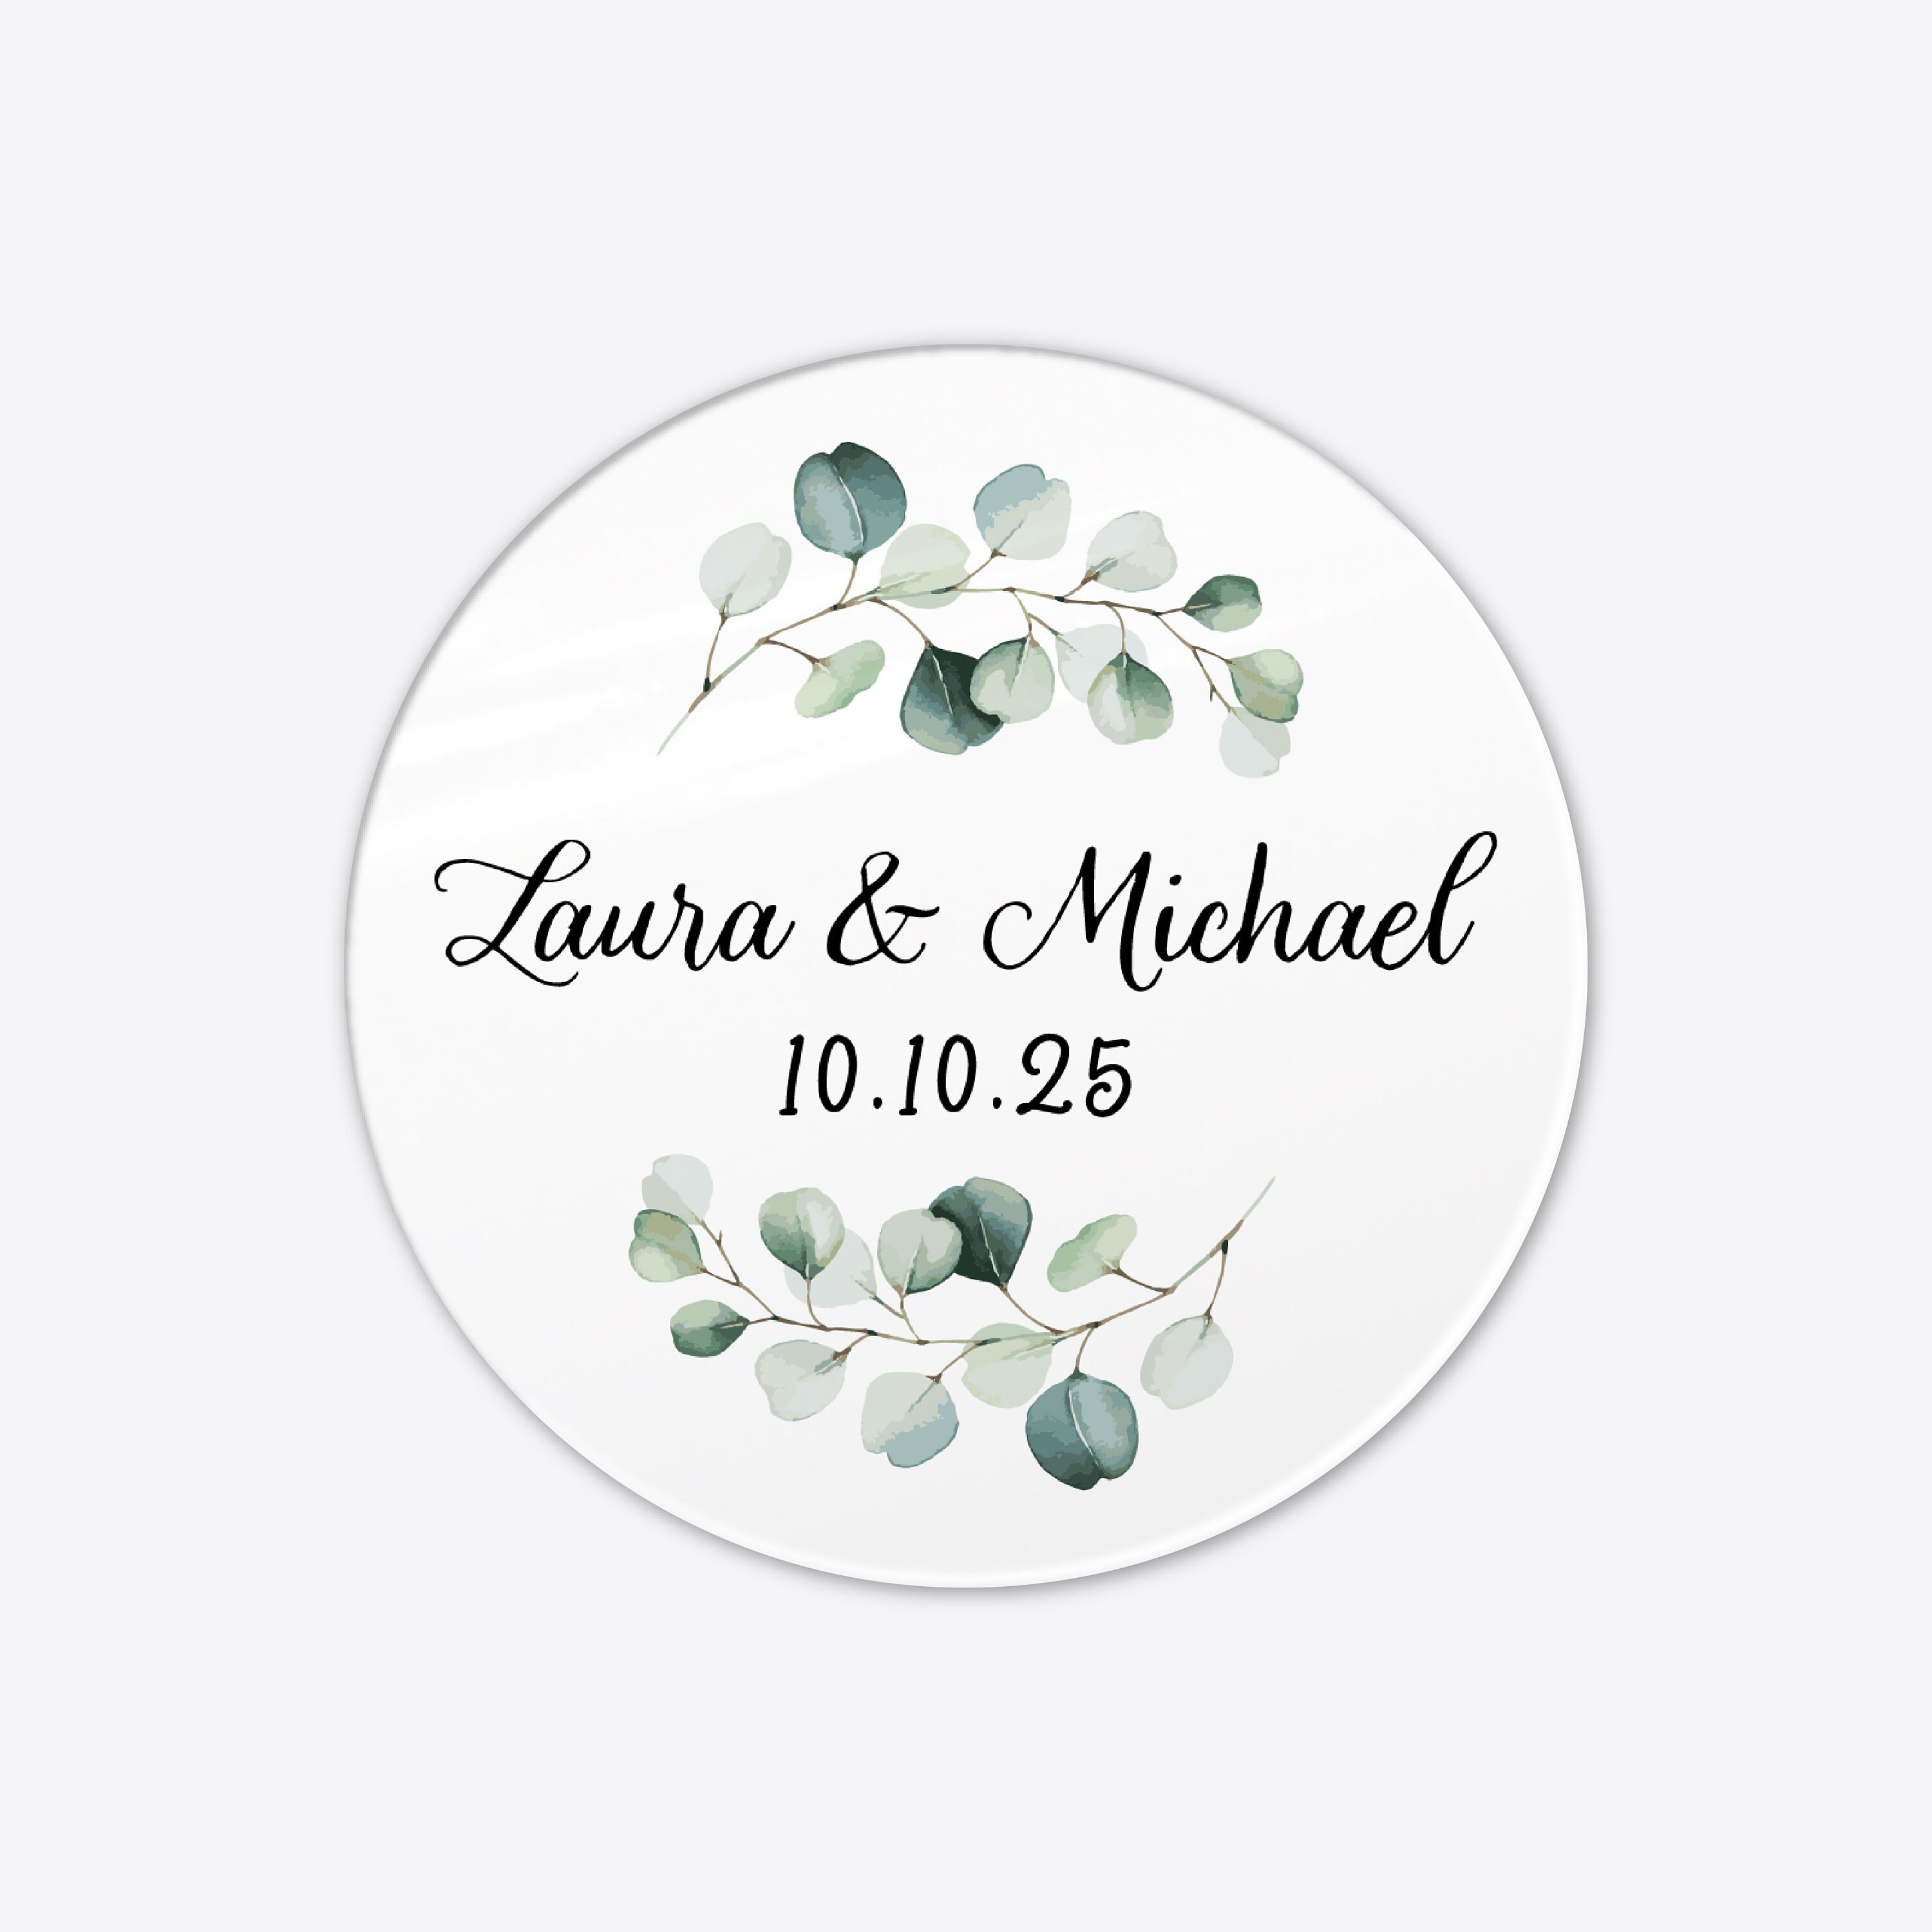 Personalized Custom Homemade Candle Making Sticker Labels